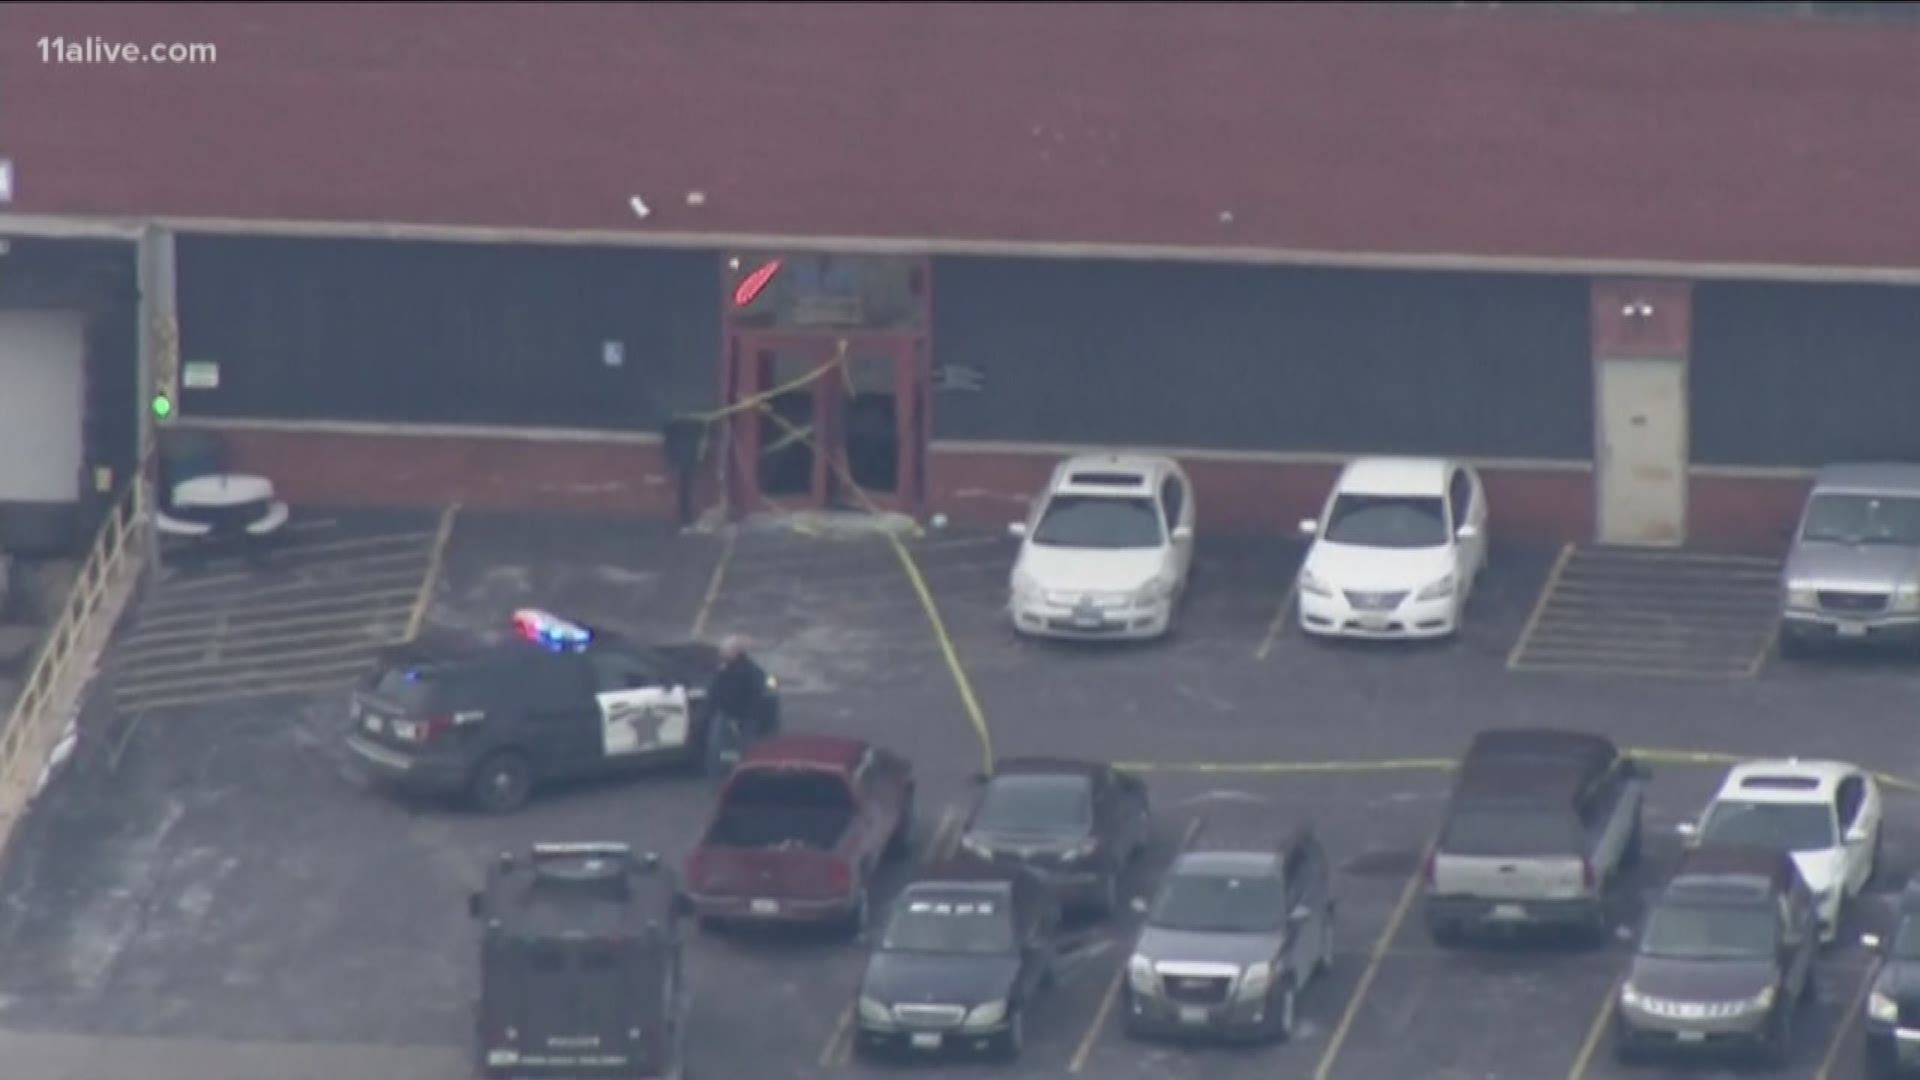 5 people were killed and several officers injured in a workplace shooting outside of Chicago.